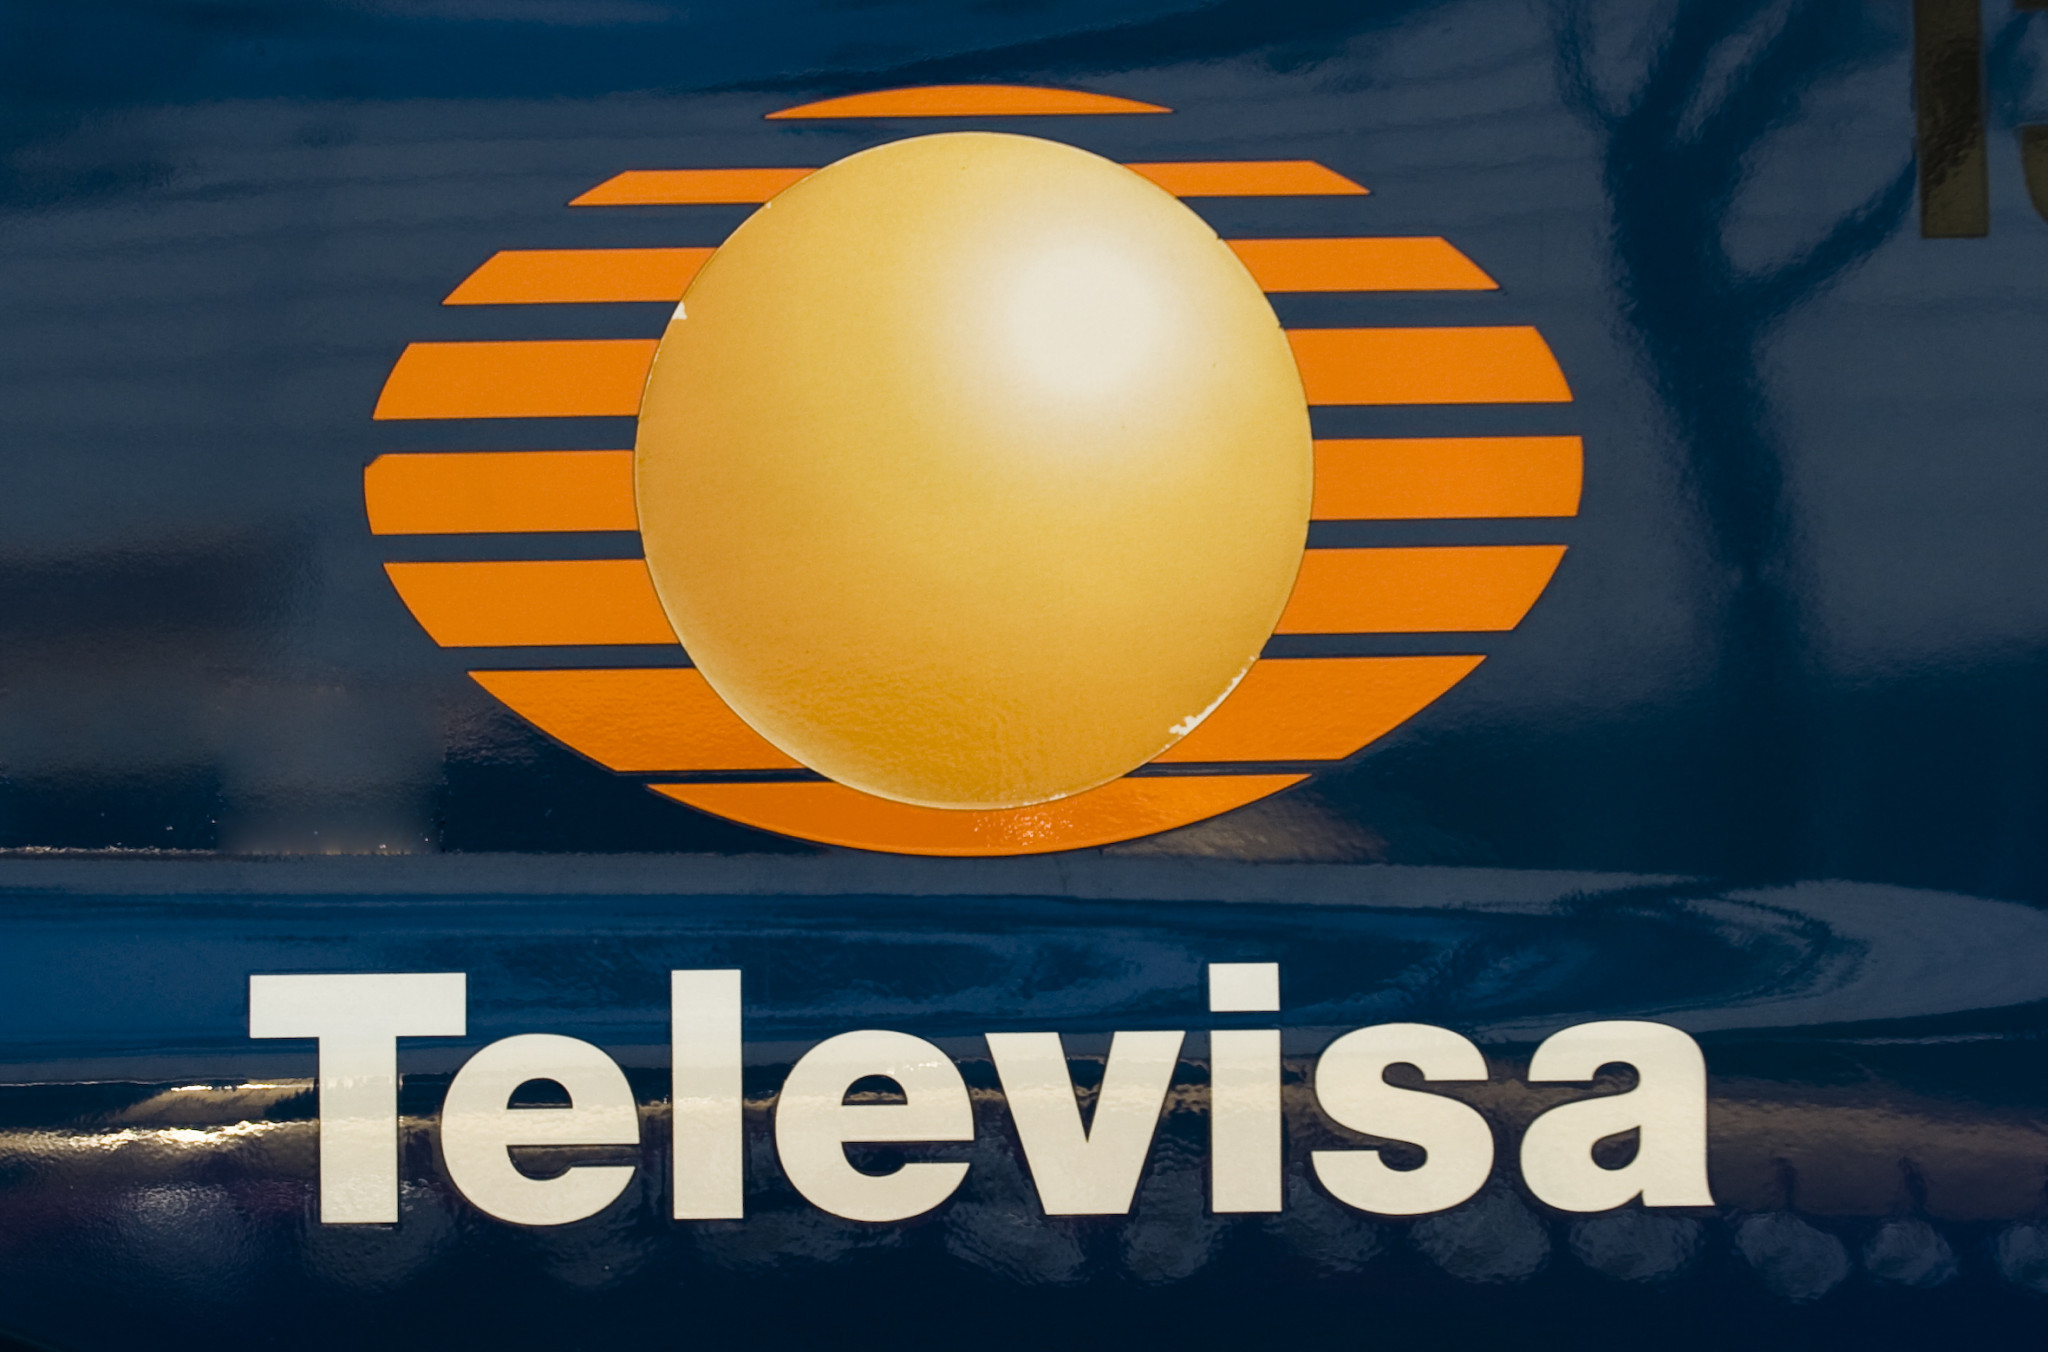 Grupo Televisa has paid a £95 million settlement after it was accused of bribing FIFA officials to win bids to broadcast the World Cup ©Getty Images